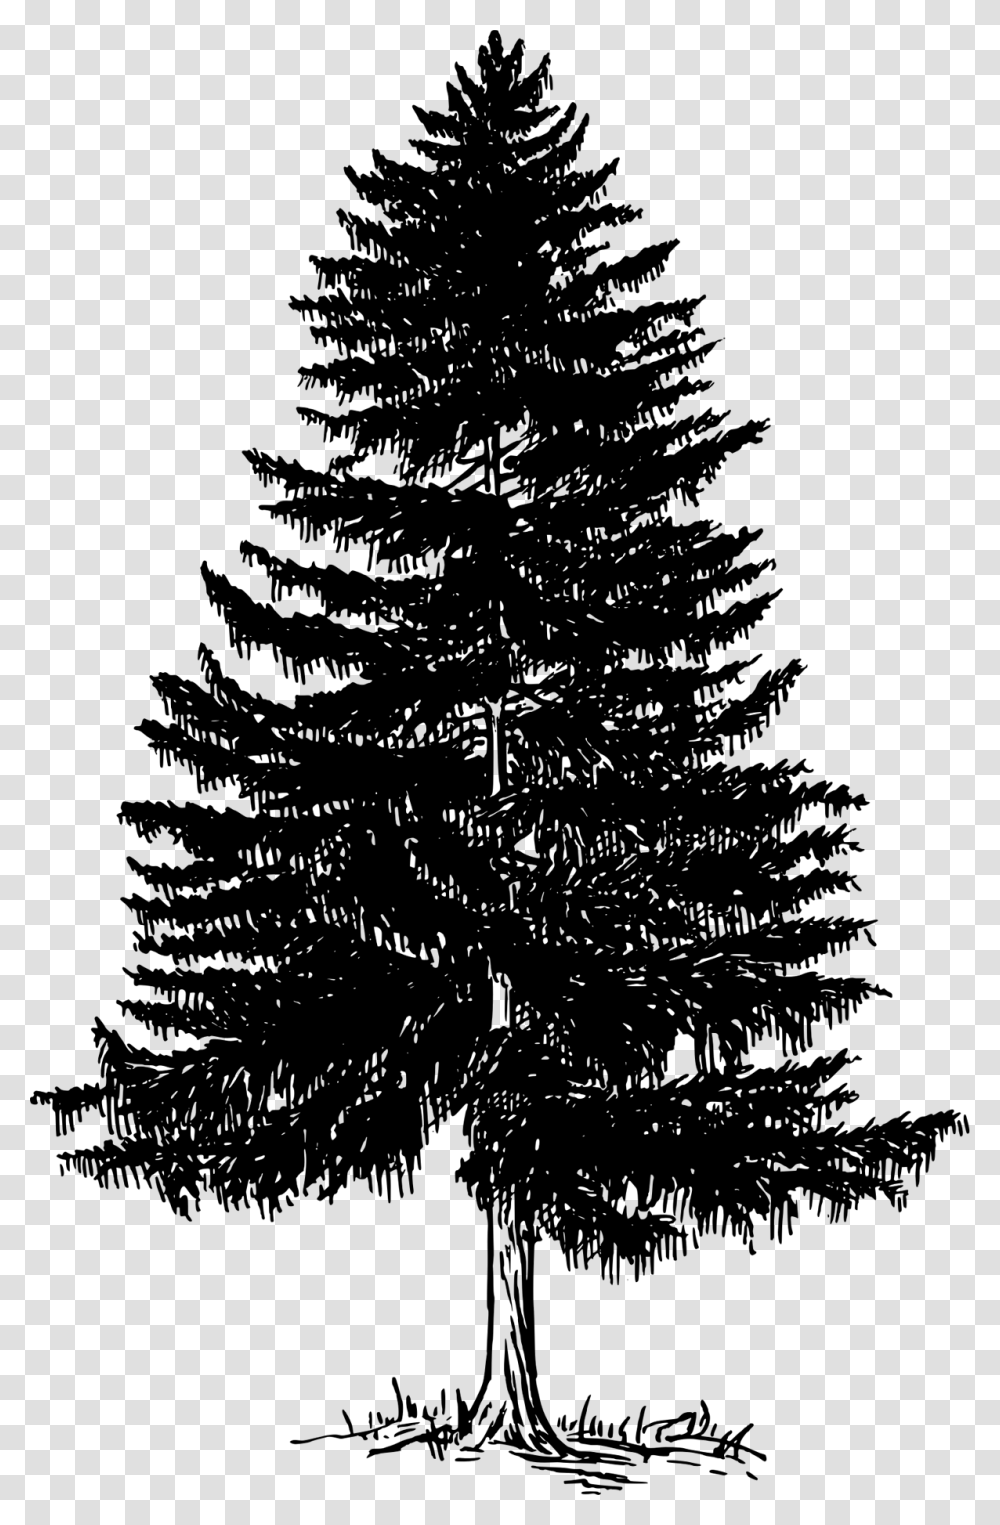 Black And White Pine Tree Vector Clipart Psd Pine Tree Black And White, Cross, Silhouette Transparent Png